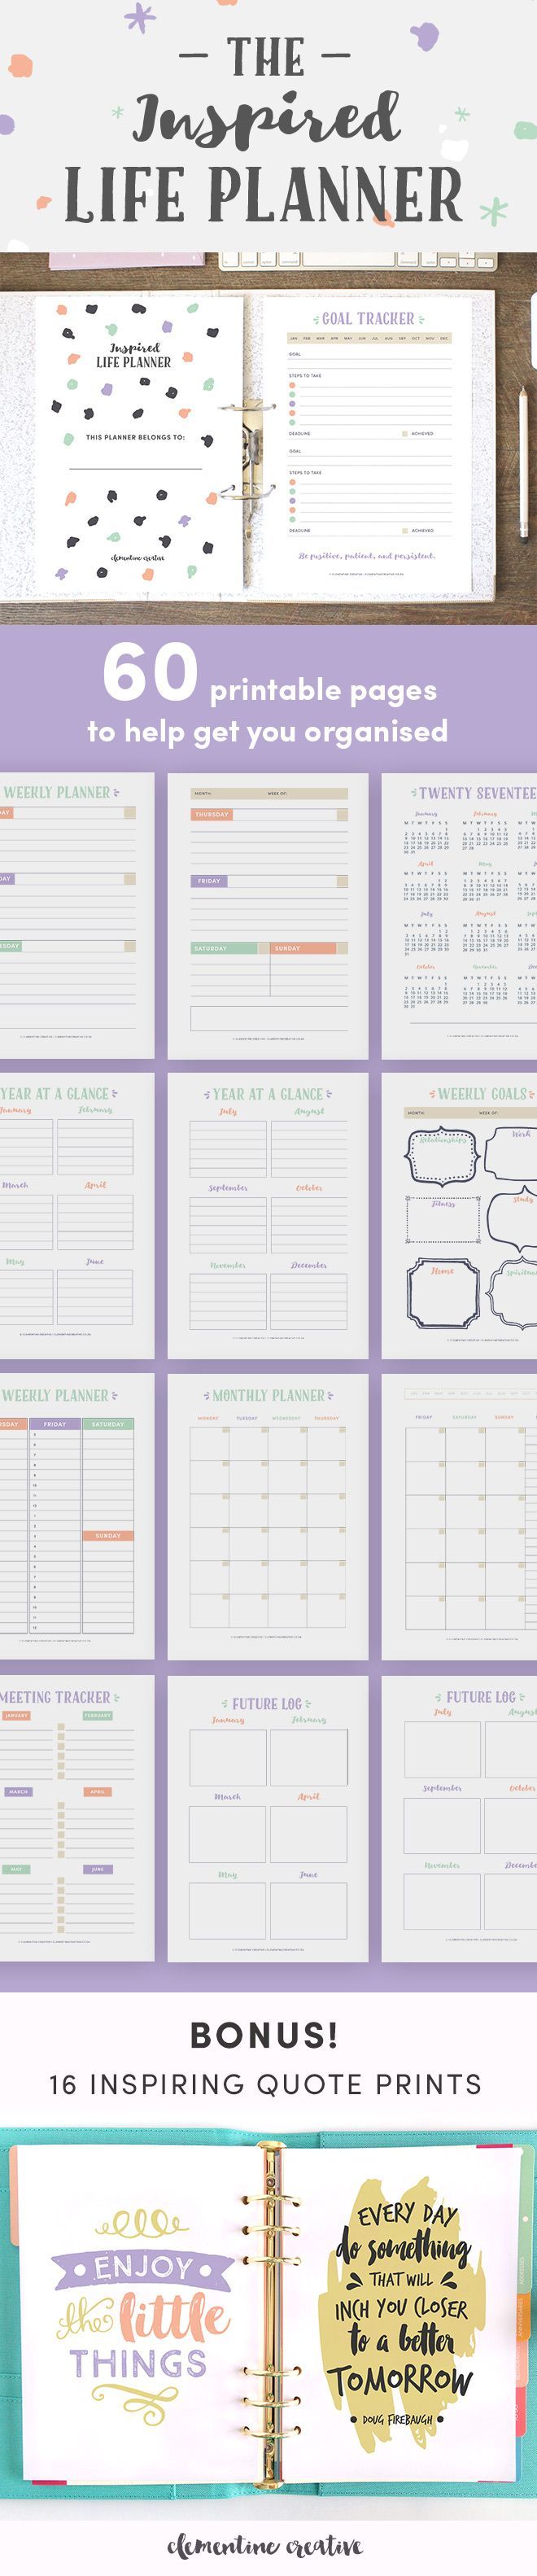 This printable life planner kit with 60 PDF pages will help you keep track of various areas in your life and as a result help you